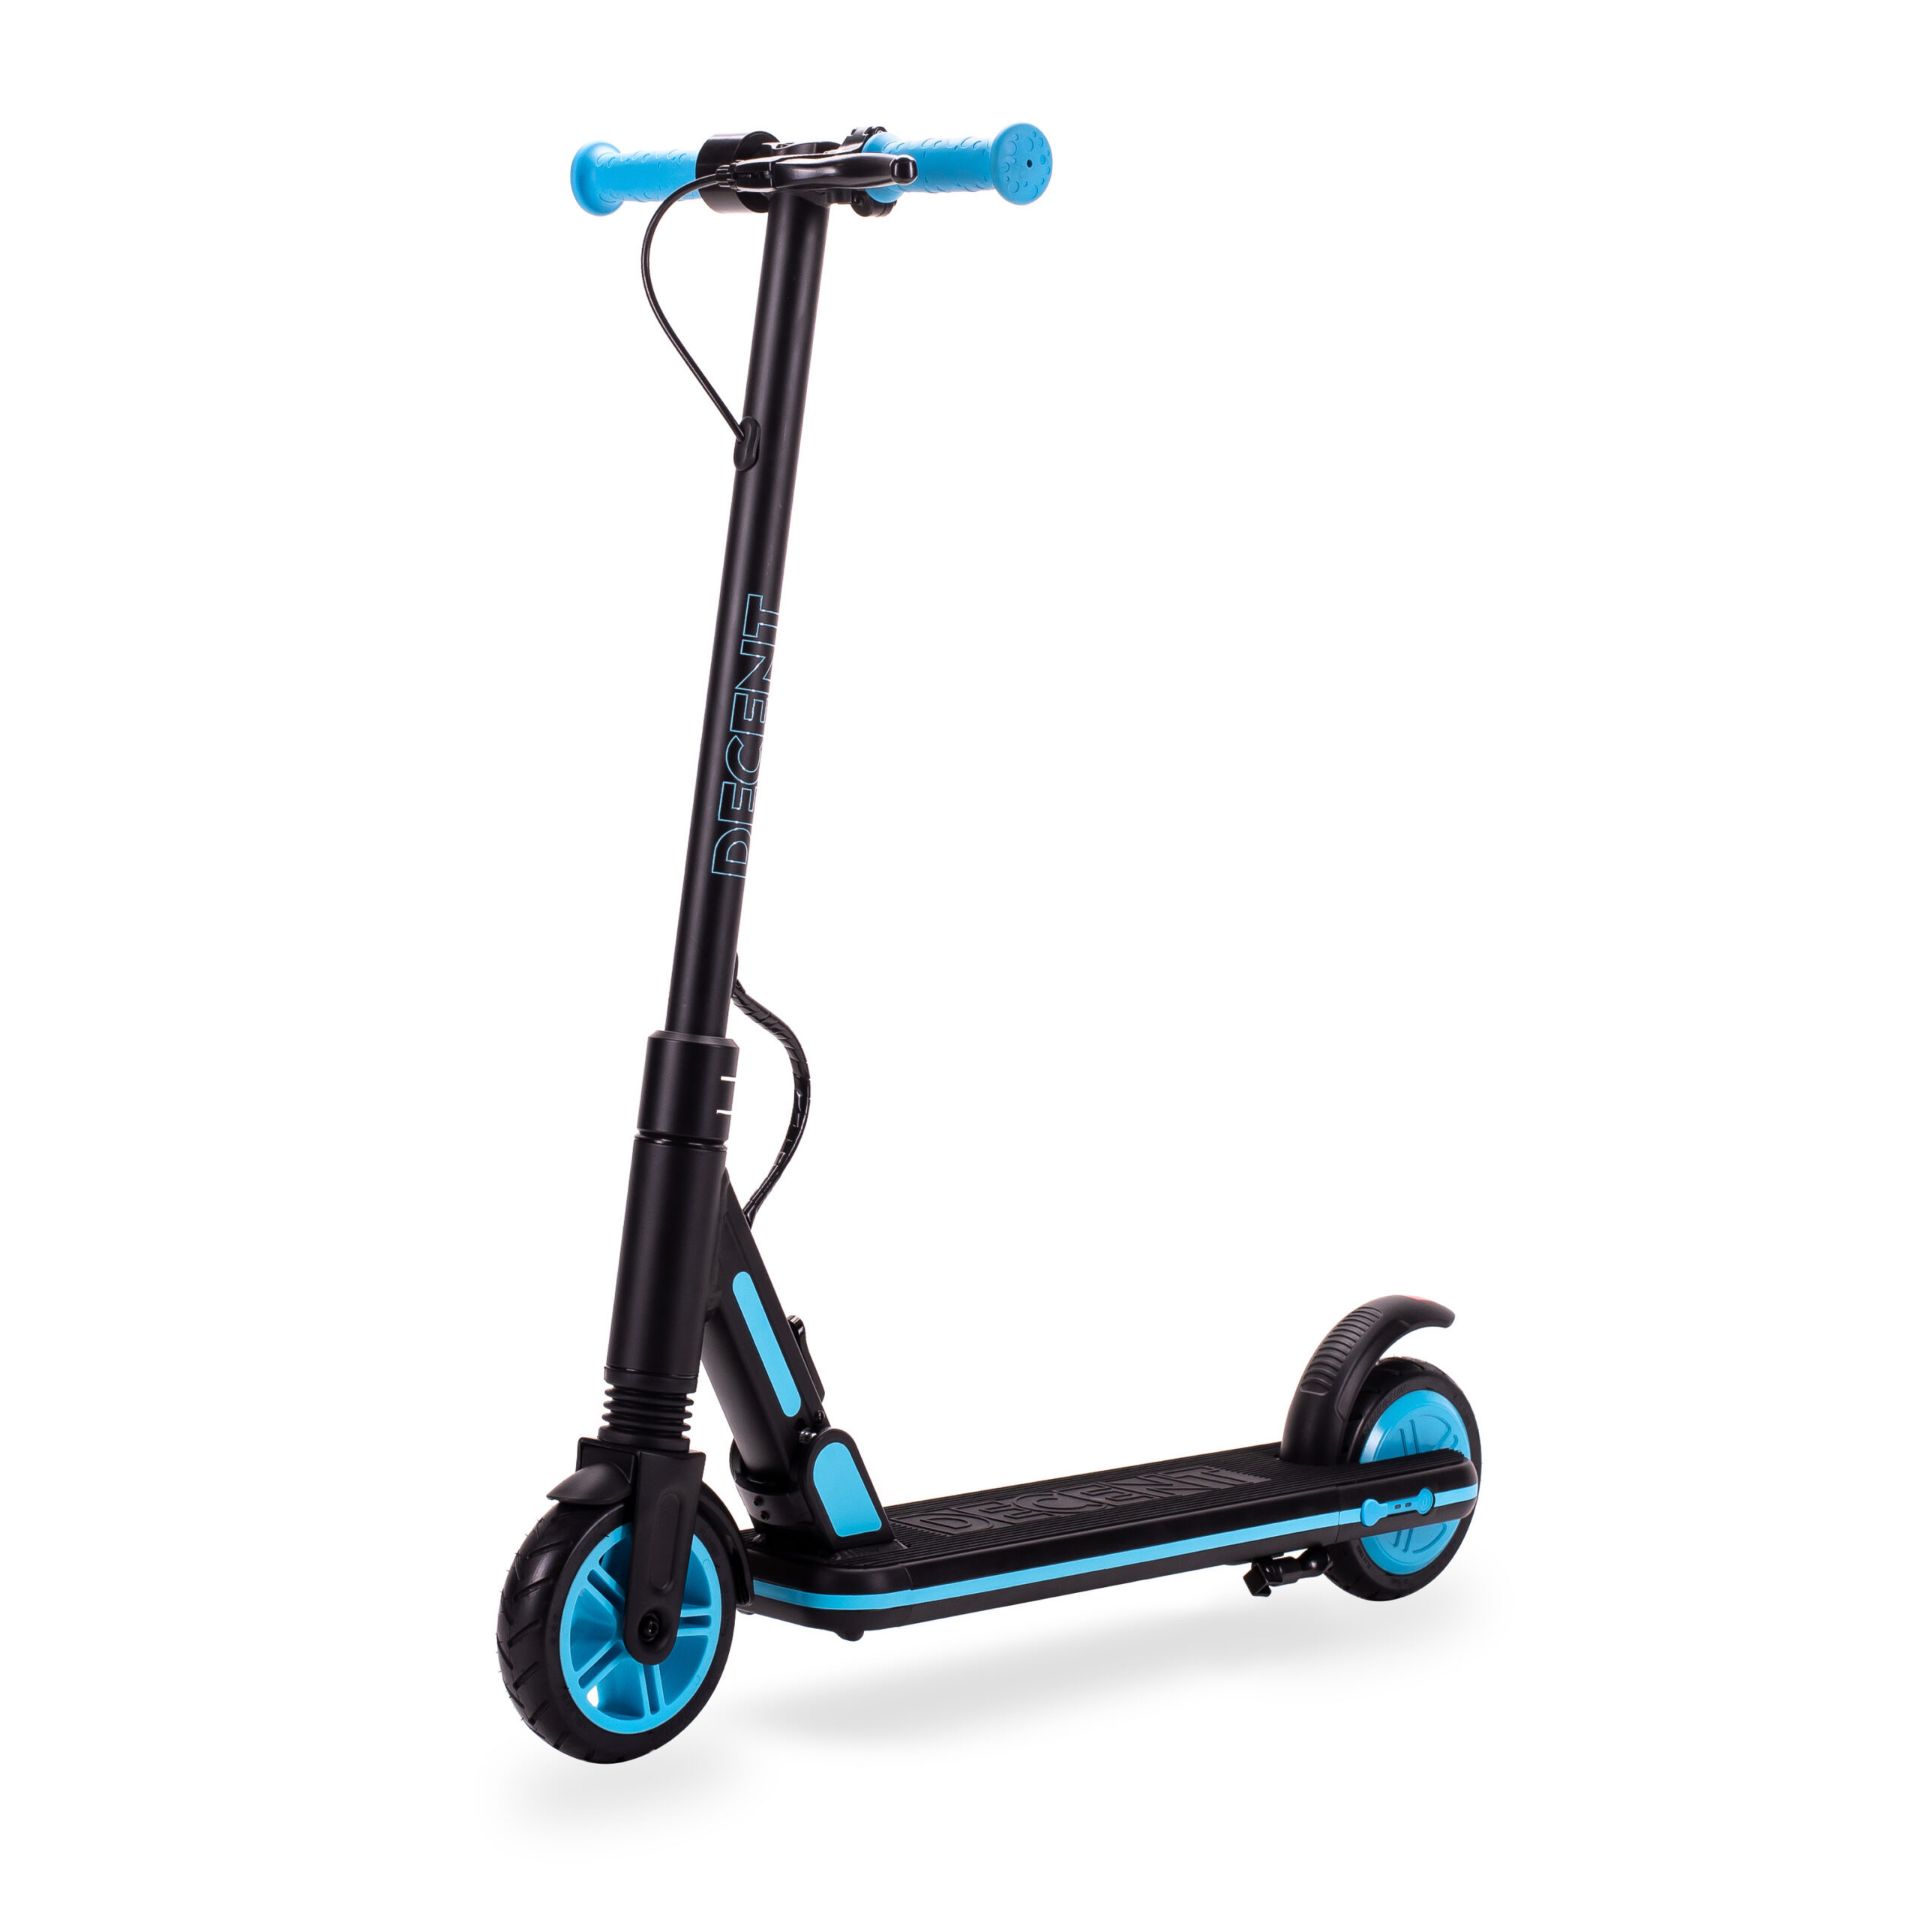 New & Boxed DECENT Kids Electric Scooter - Blue/Black. Let your kids zip around in style. With